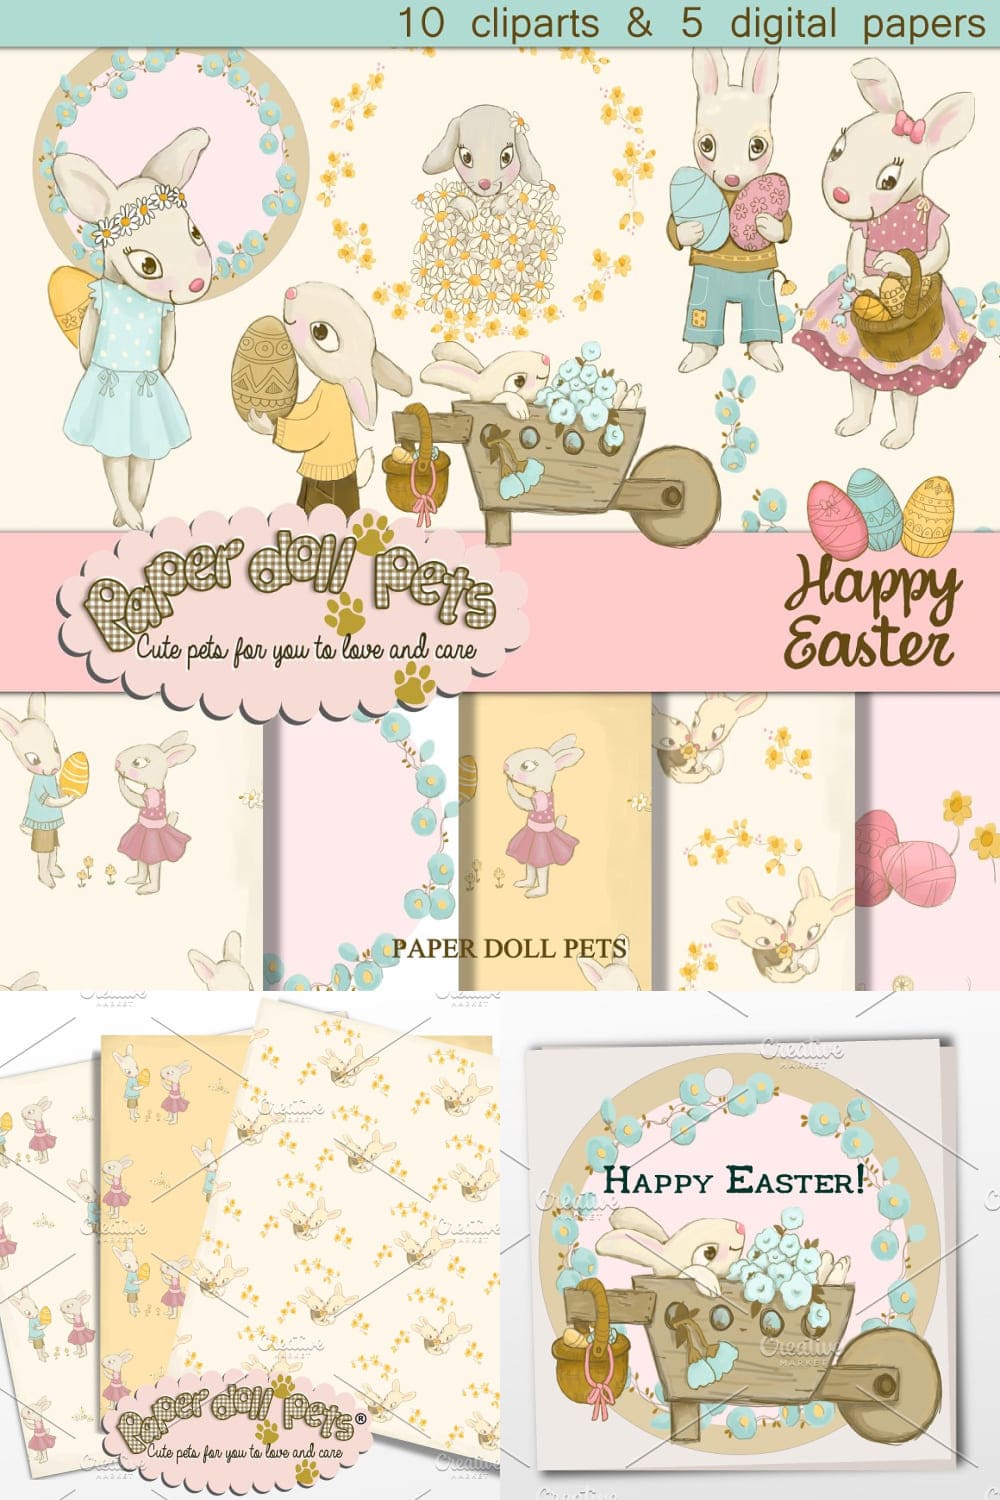 Happy Easter Bunnies Clipart - pinterest image preview.